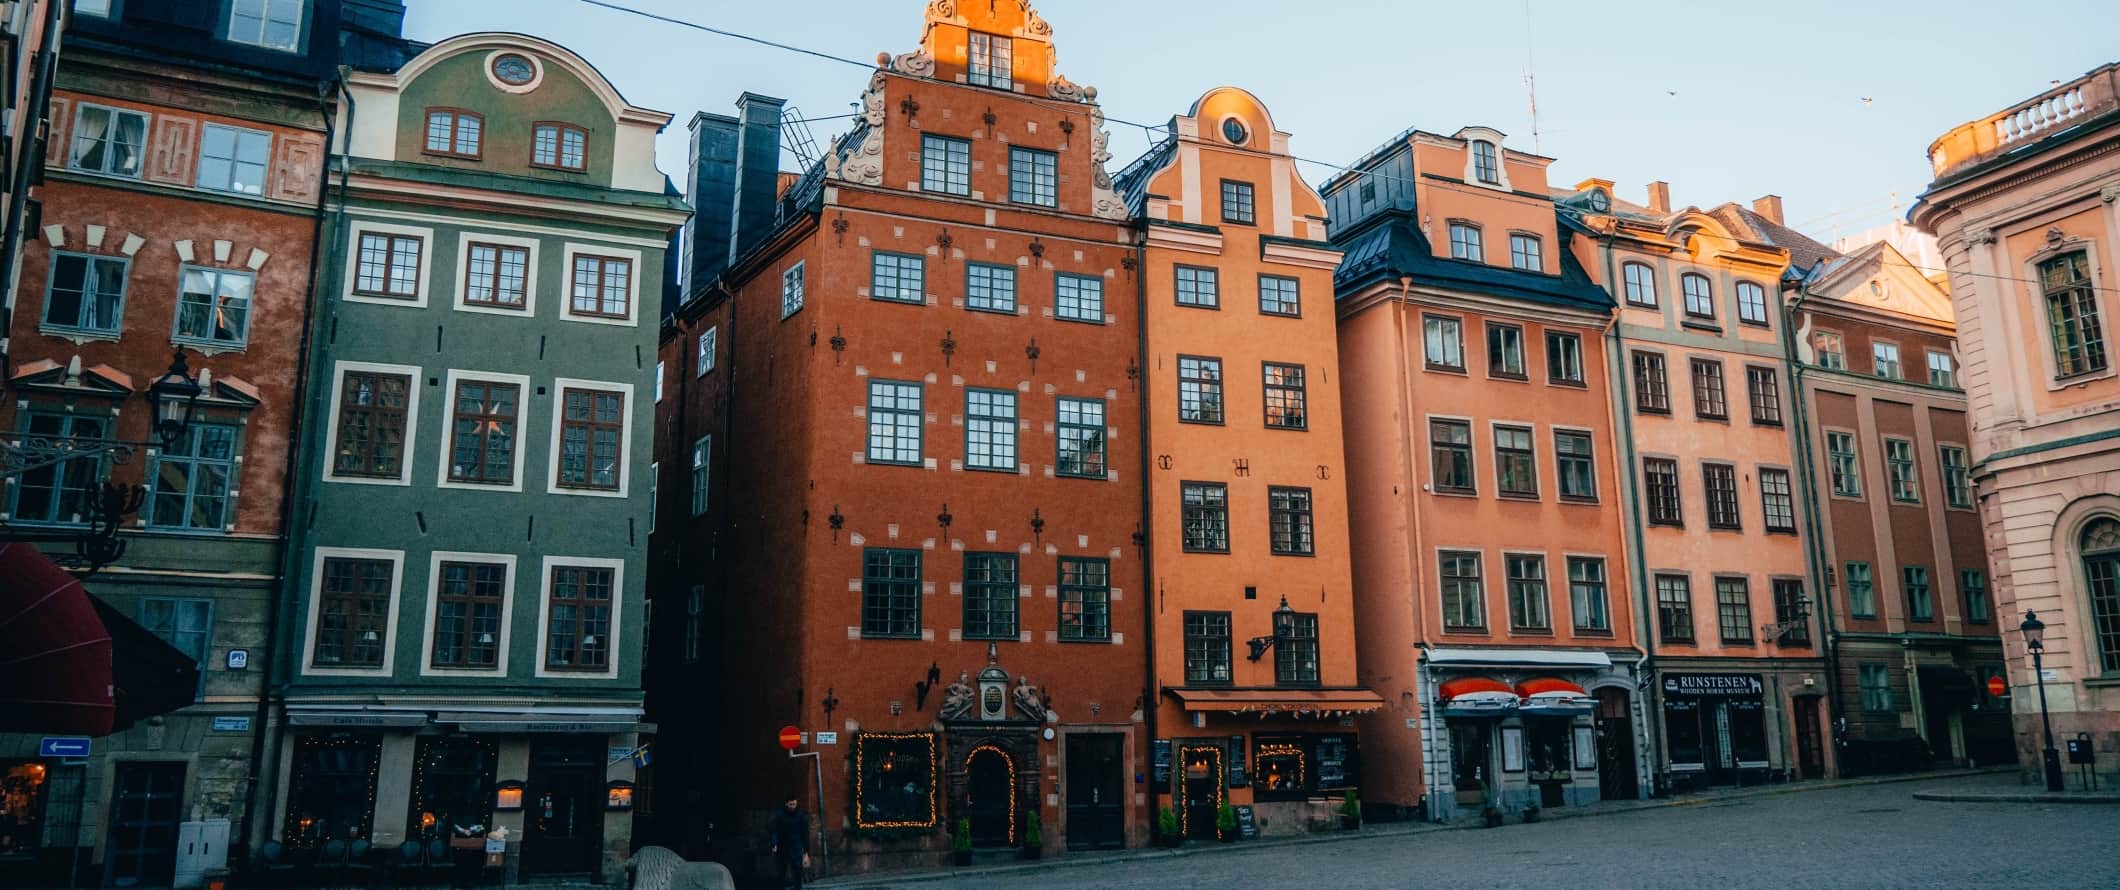 Colorful historic buildings lining a plaza in Gamla Stan, the old town of Stockholm, Sweden